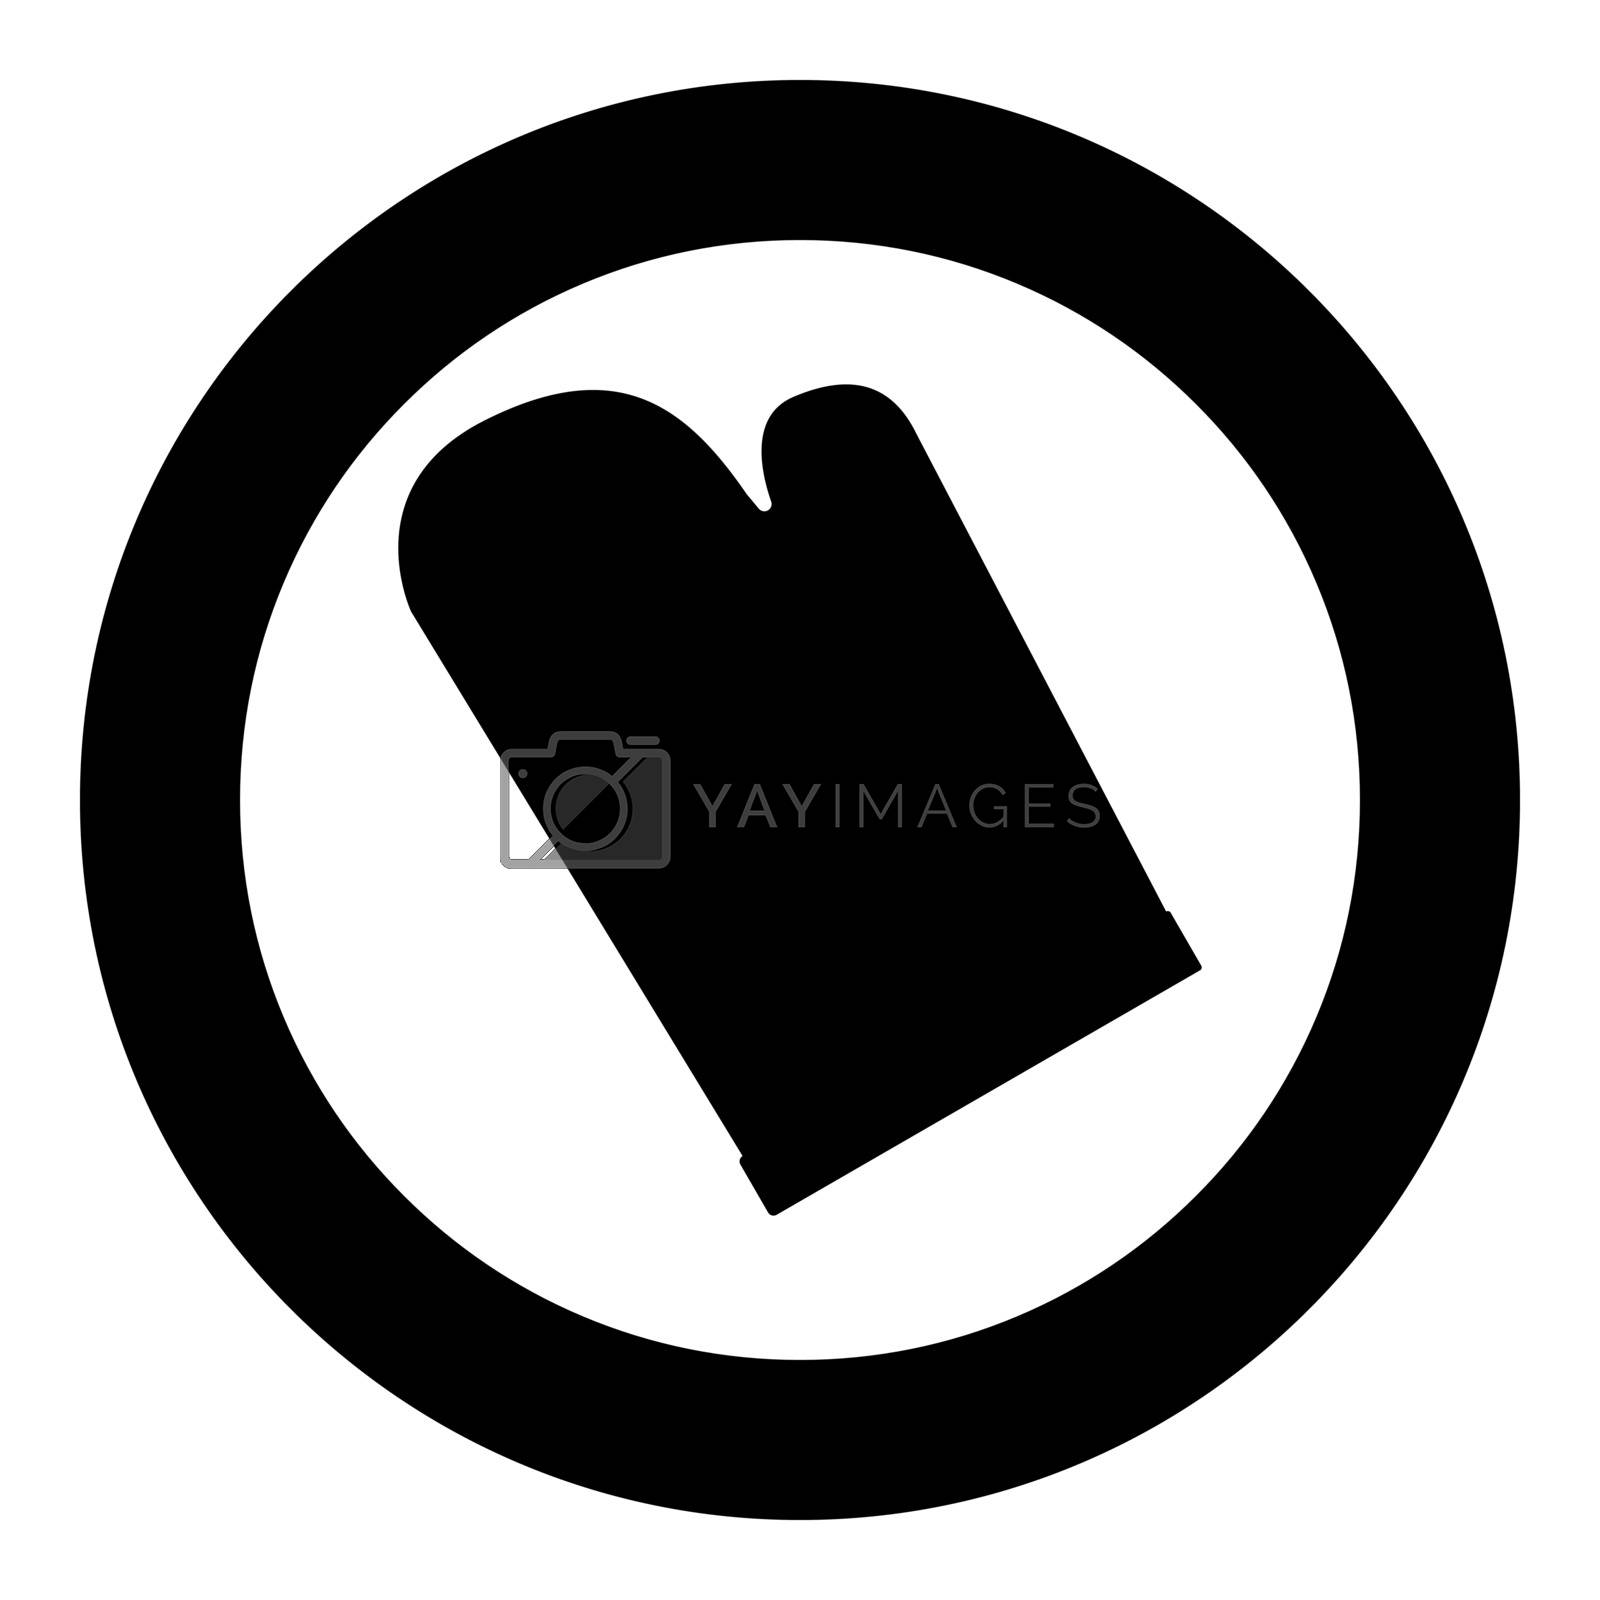 Royalty free image of Kitchen glove icon black color in circle by serhii435